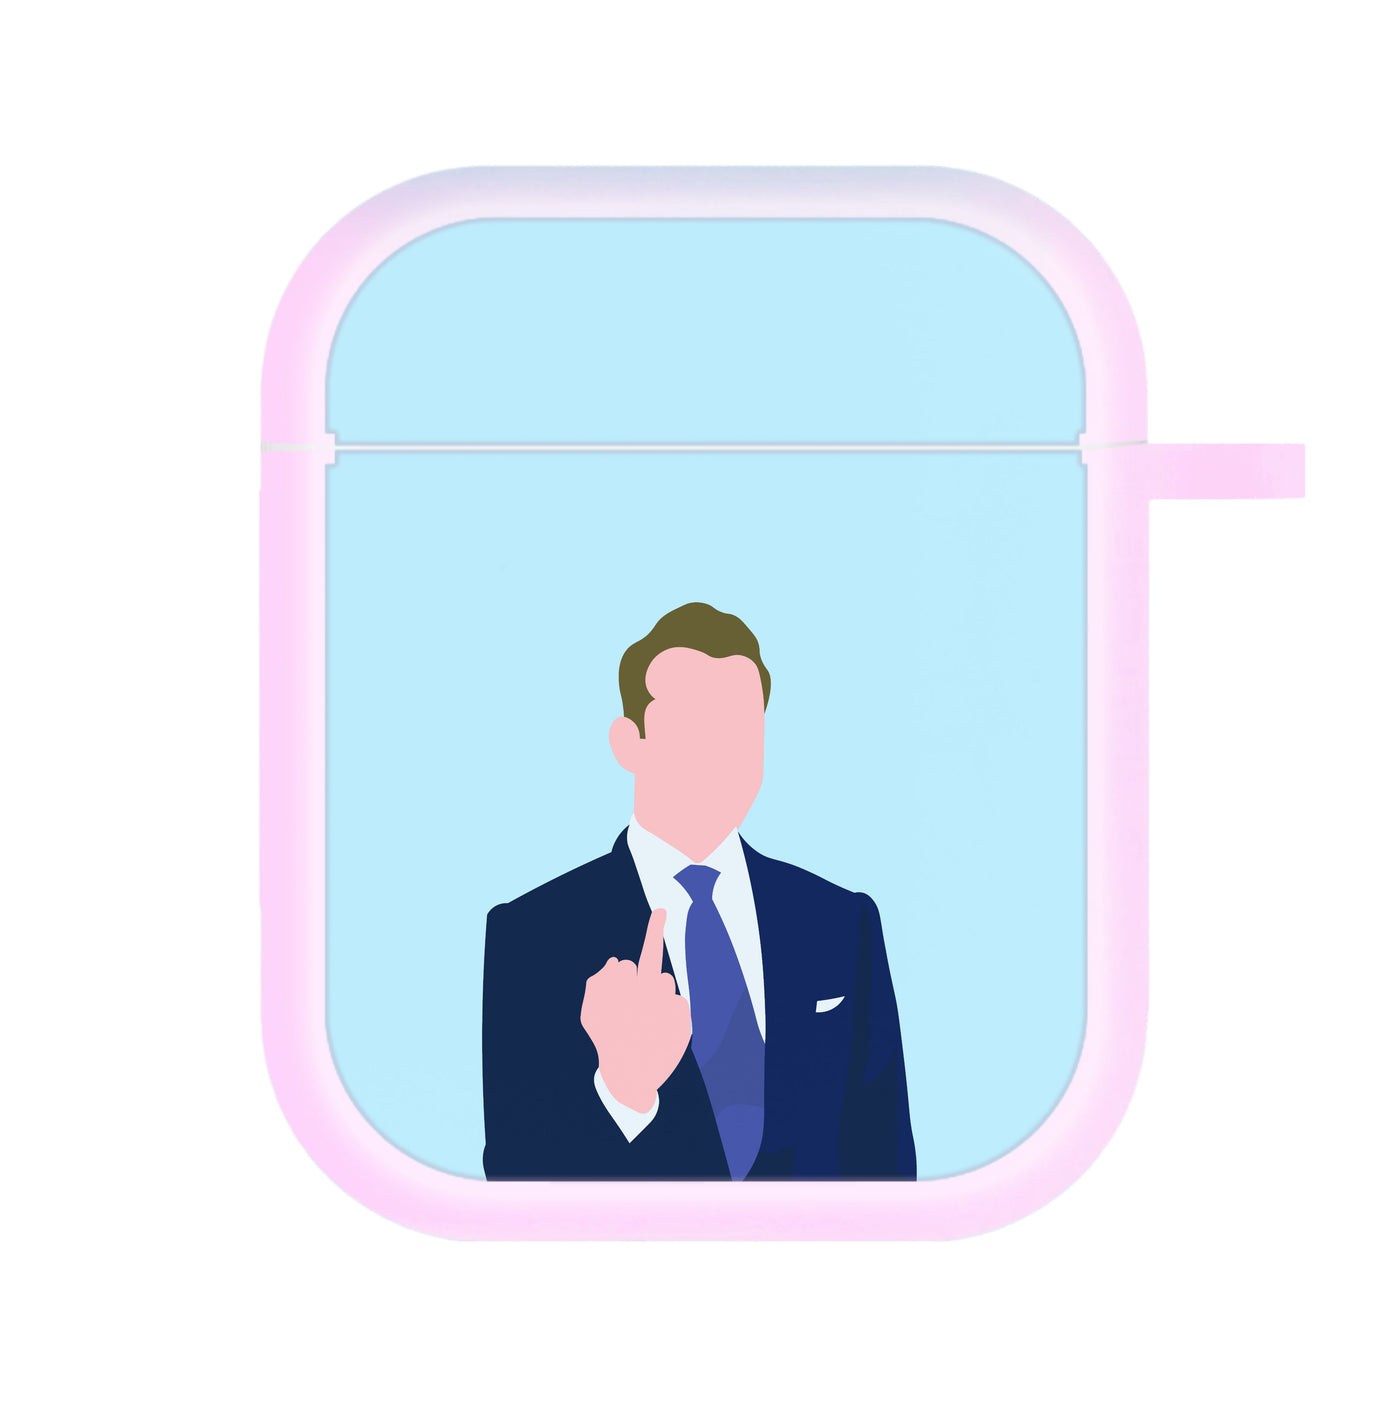 Middle Finger - Suits AirPods Case